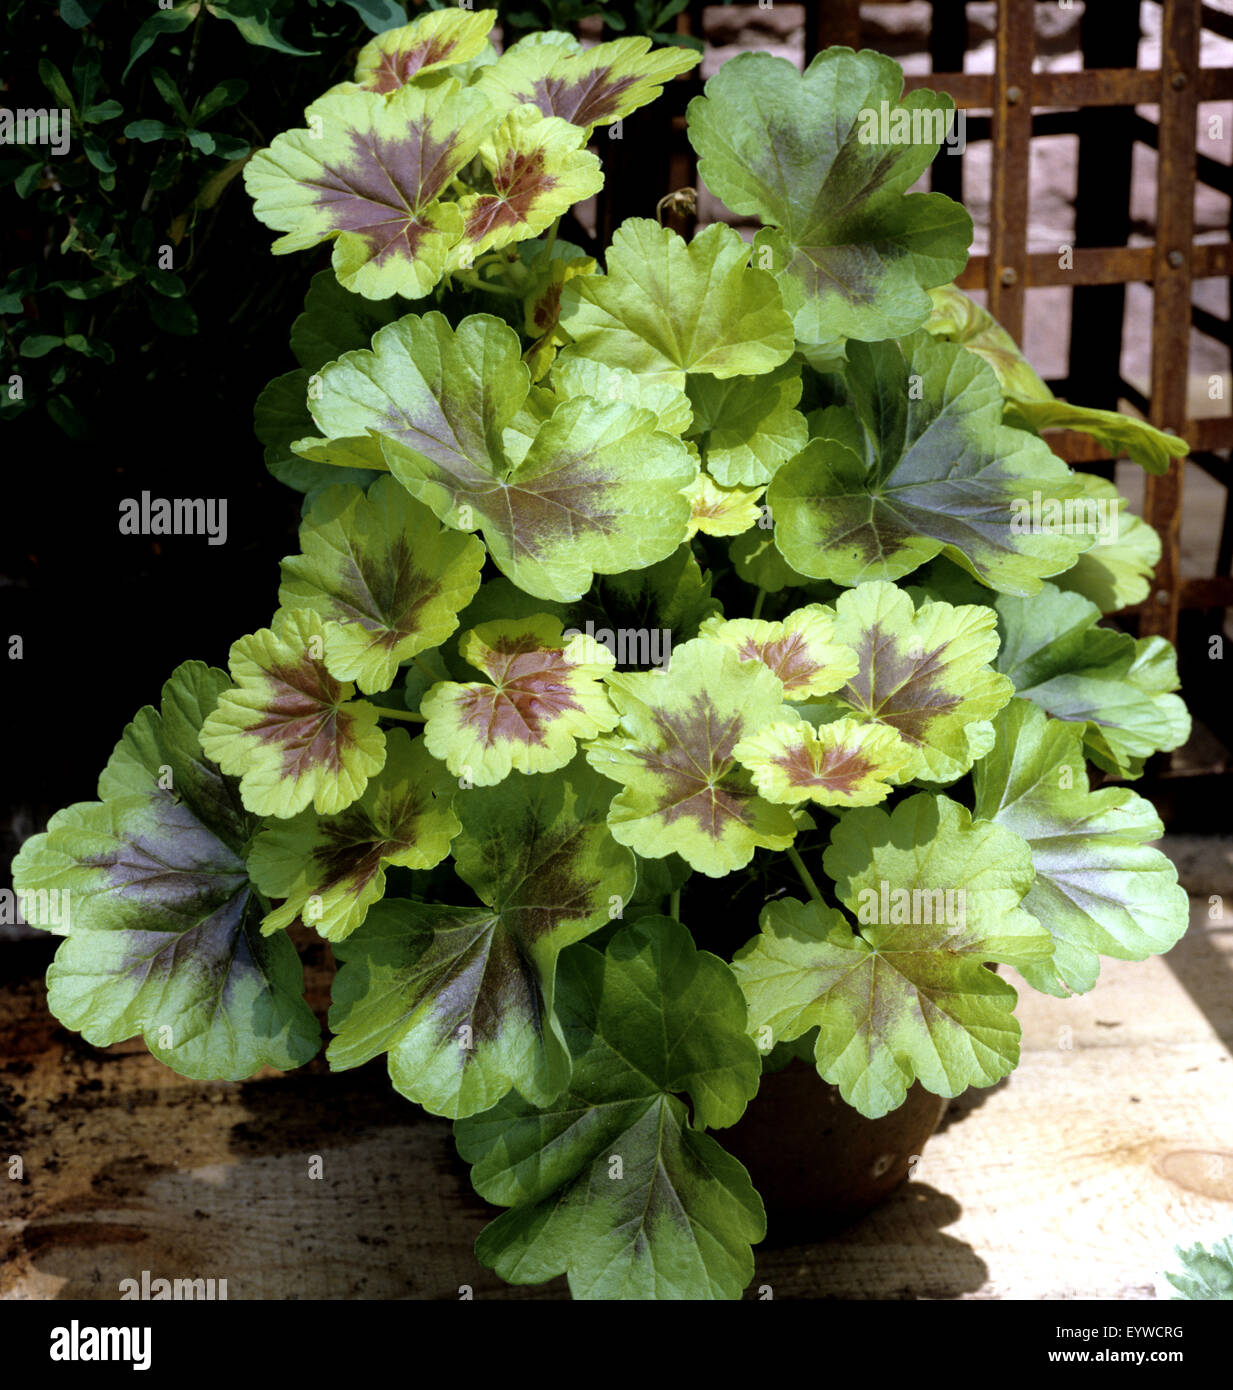 Page 12 - Balkonblumen Blumen High Resolution Stock Photography and Images  - Alamy